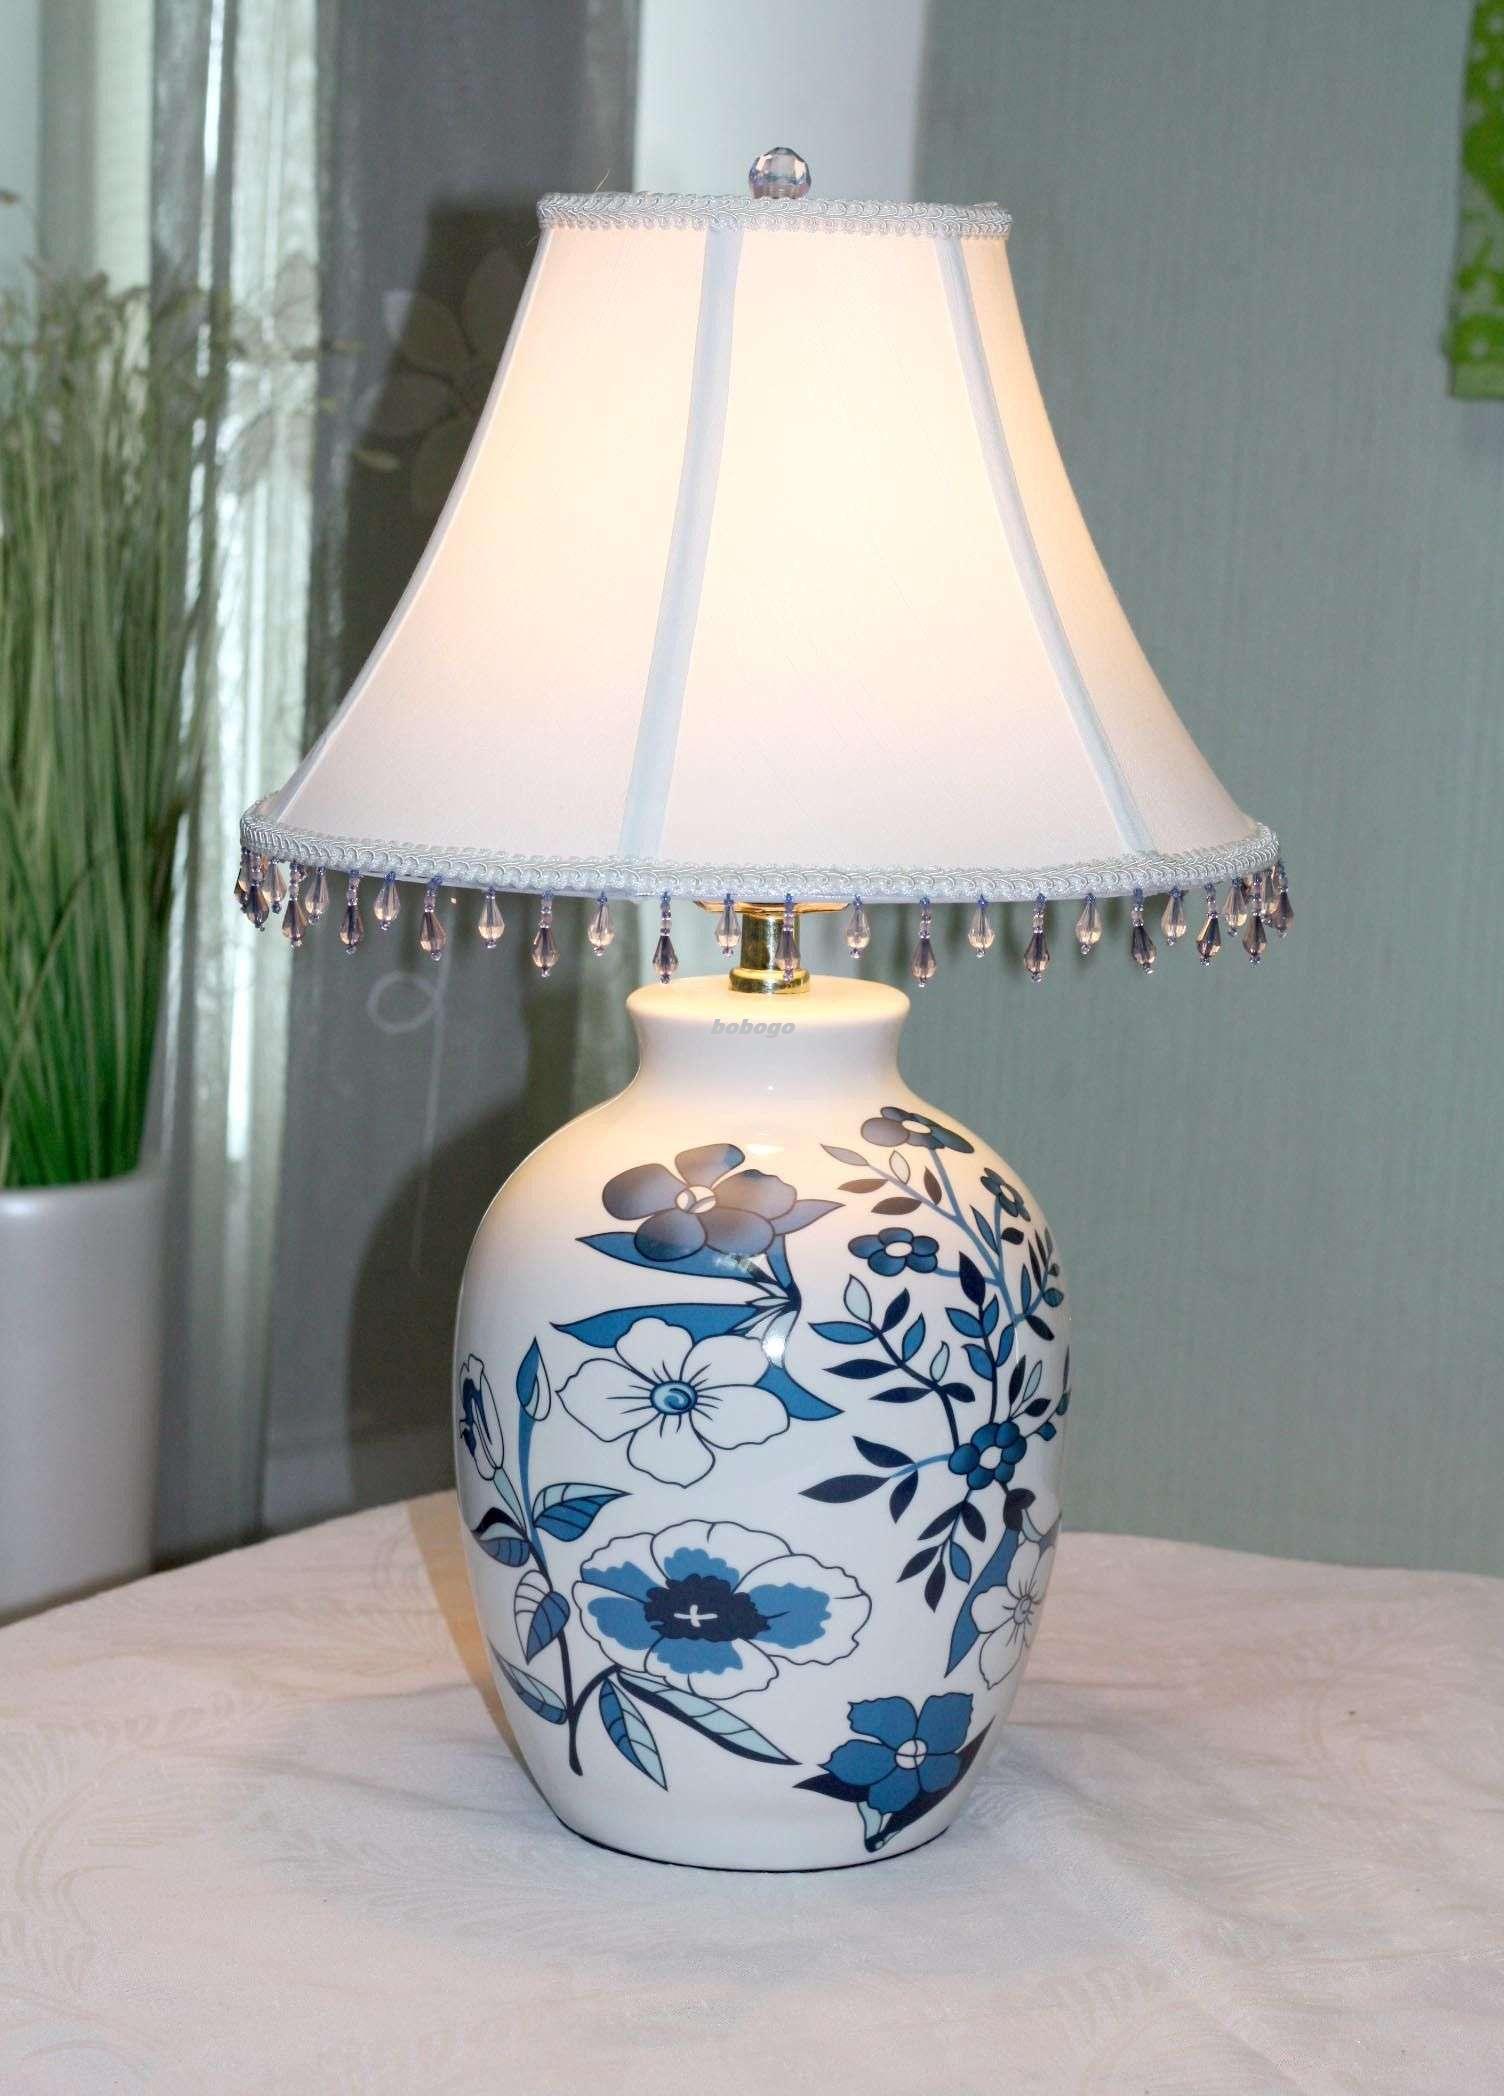 Top 50 Modern Table Lamps for Living Room Ideas   Home Decor Ideas